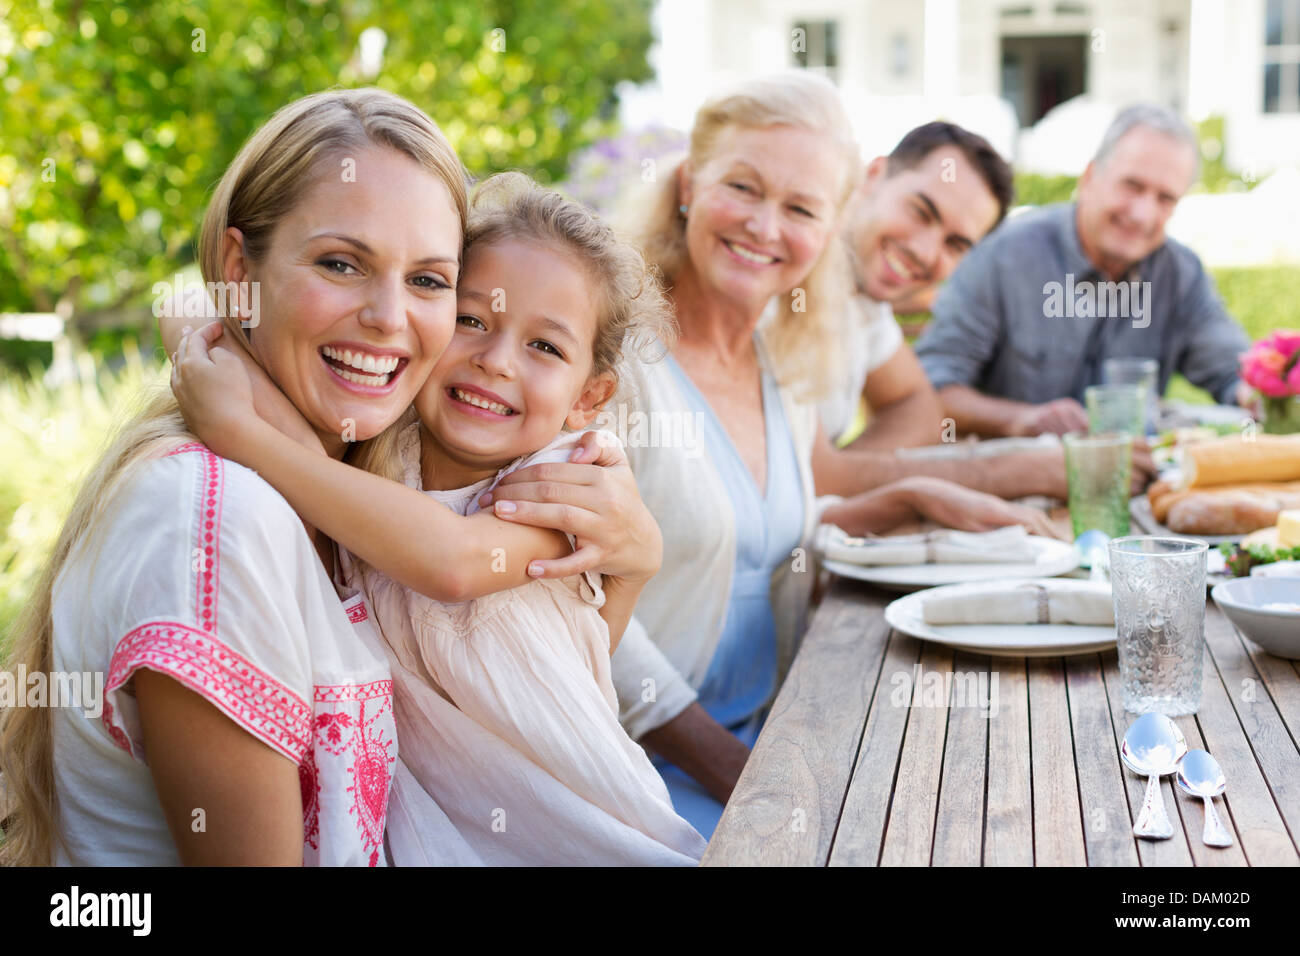 Mother and daughter hugging at table outdoors Stock Photo